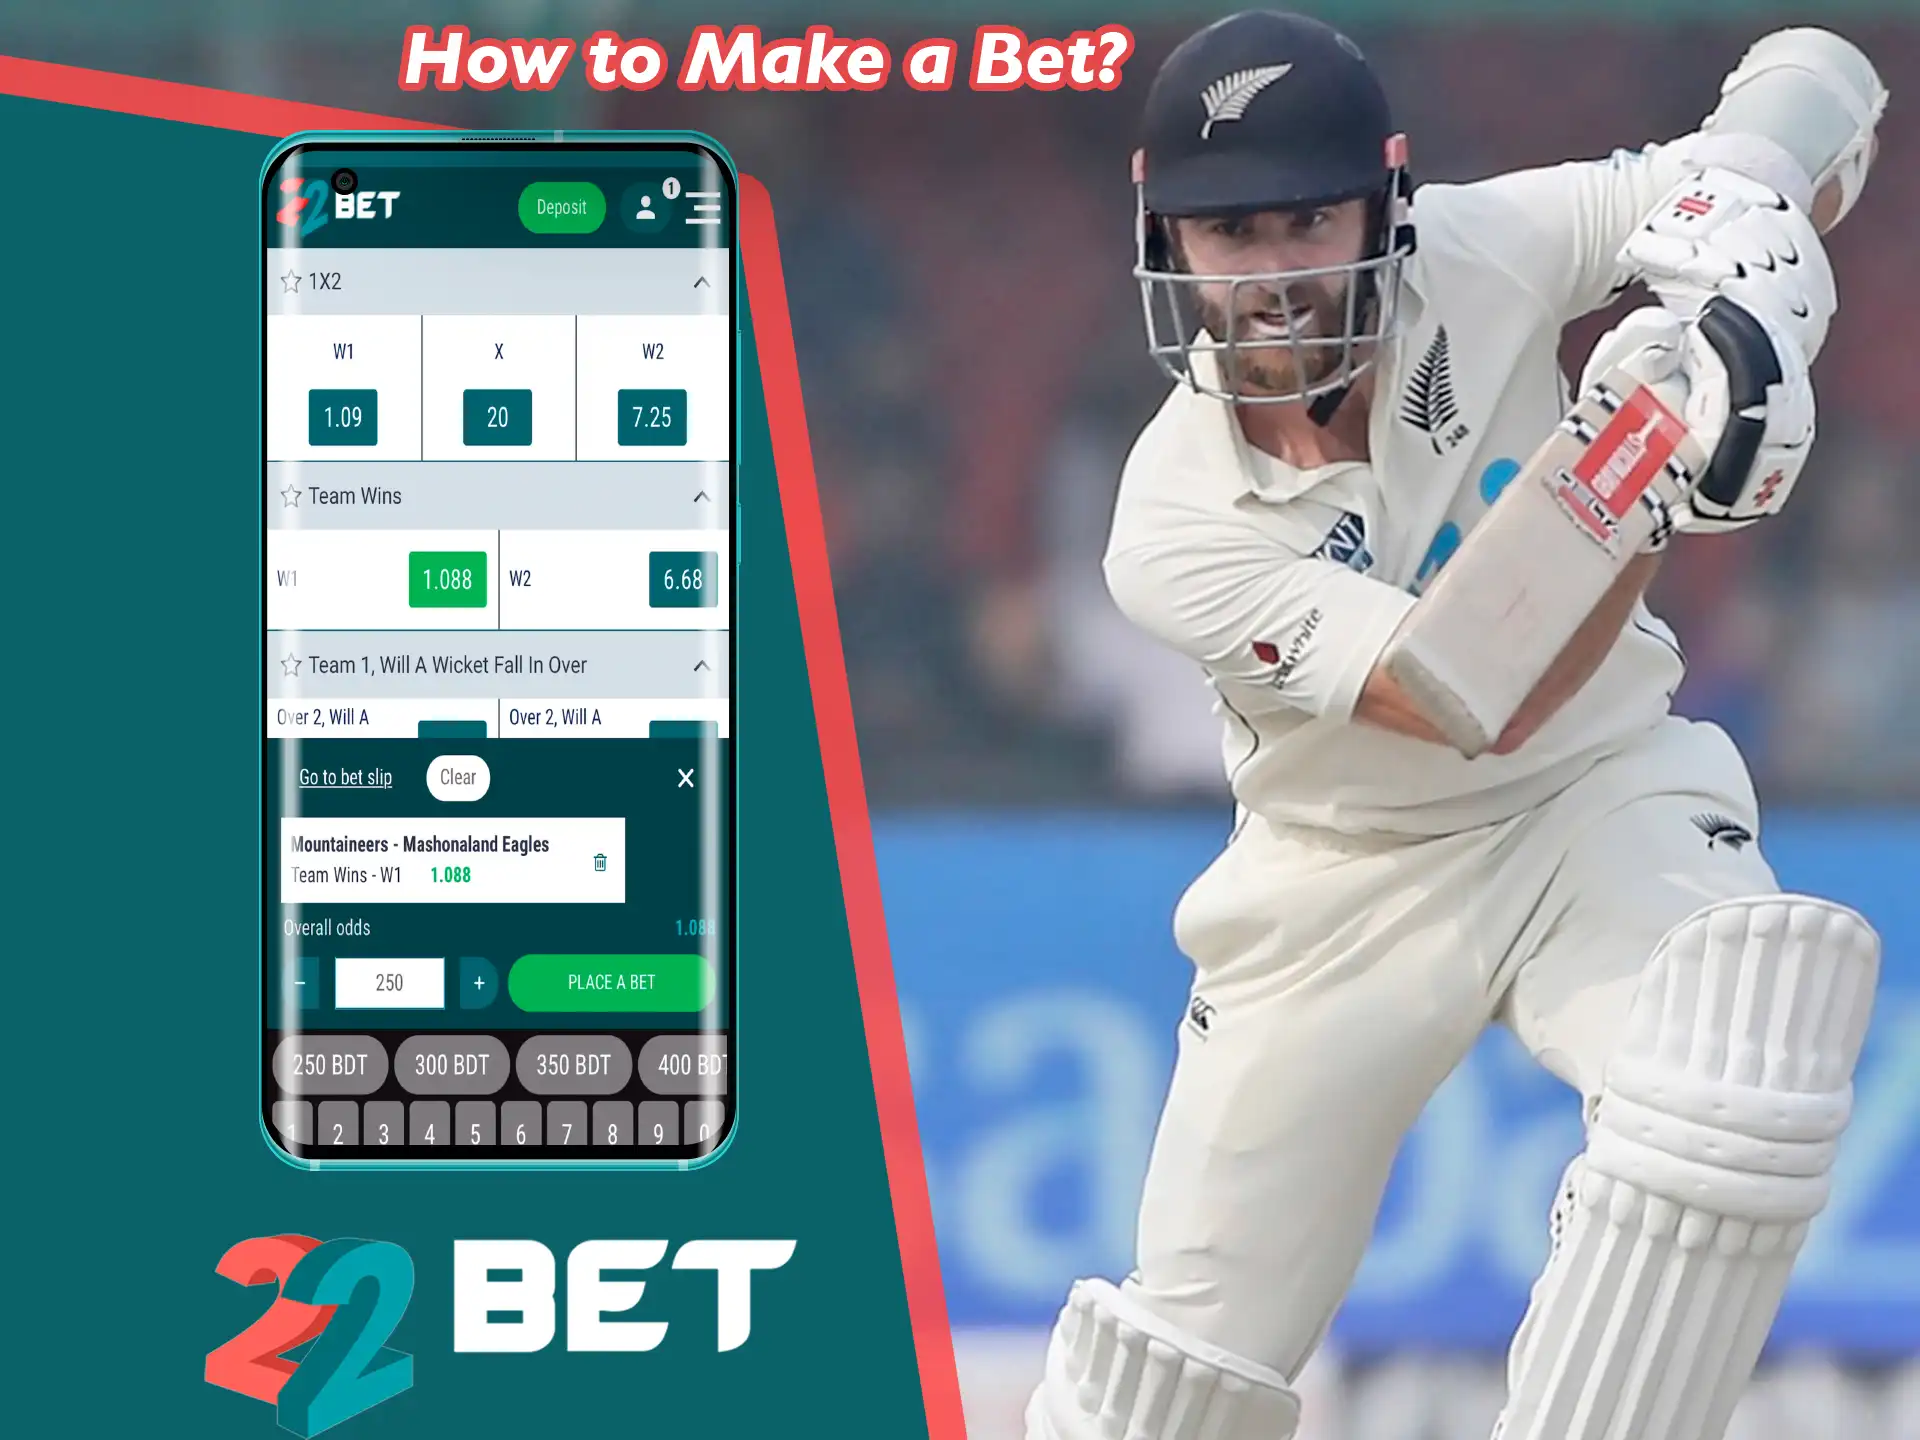 Instruction: how to place a bet in 22bet.